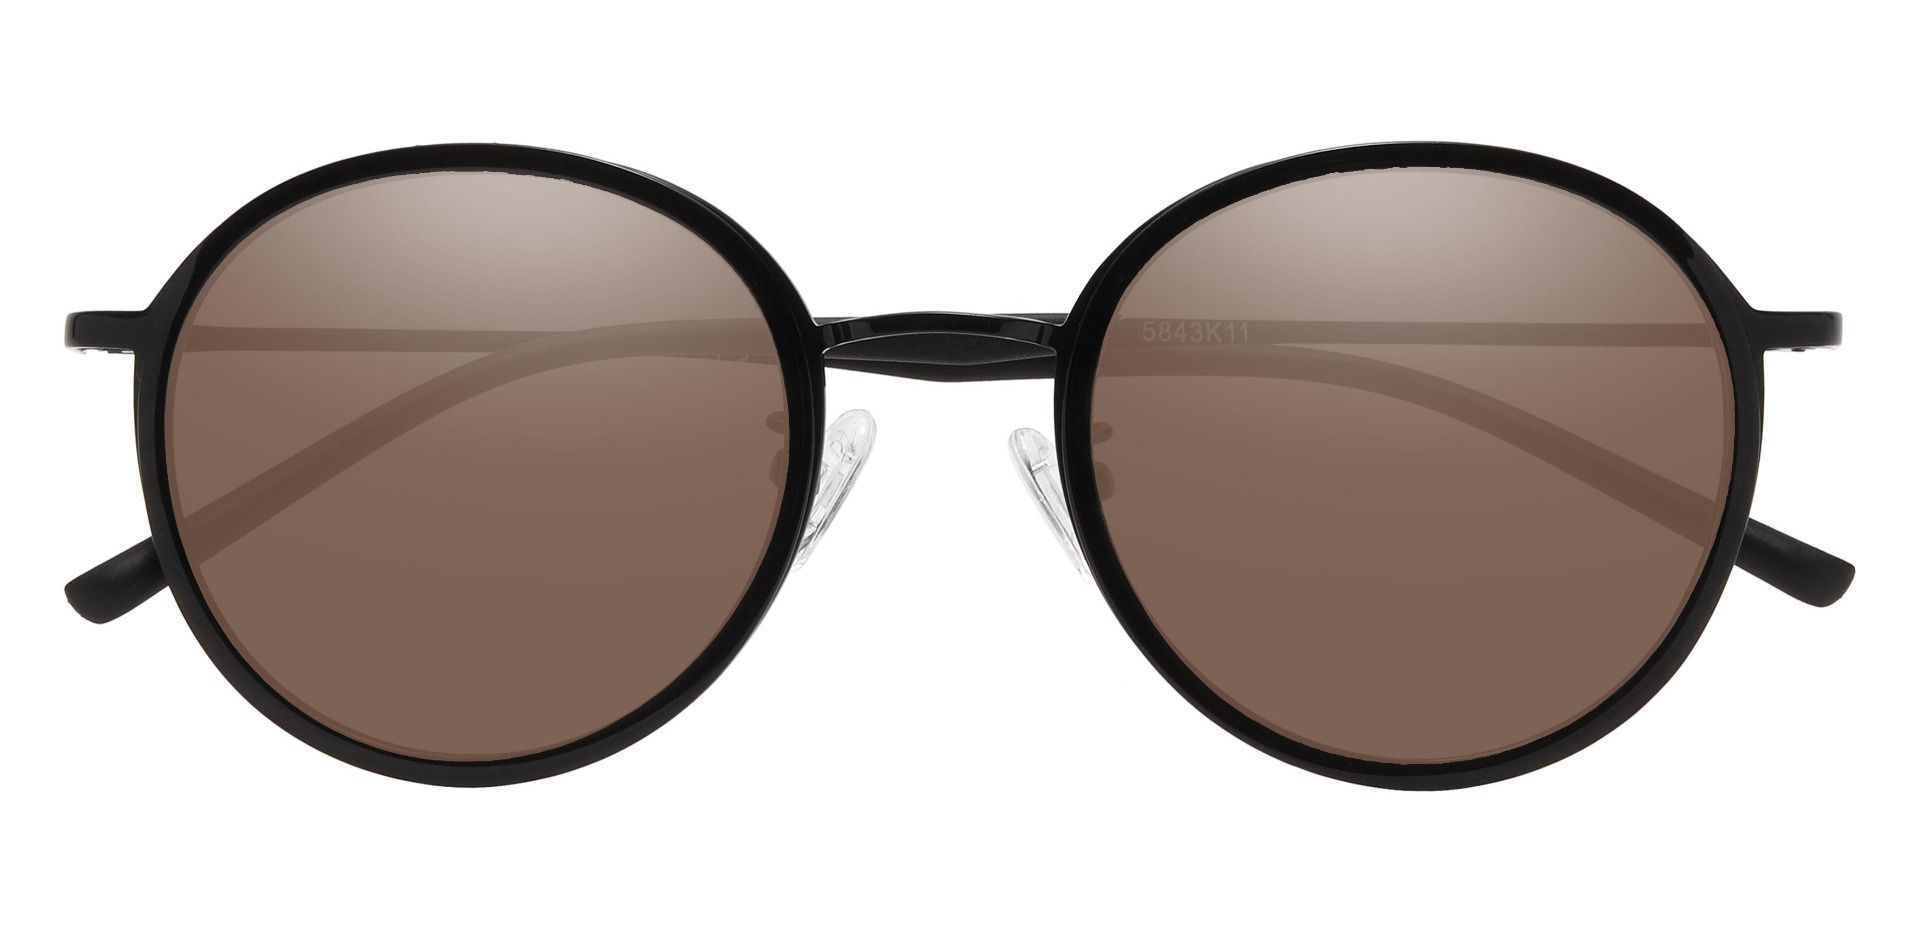 Brunswick Round Lined Bifocal Sunglasses - Black Frame With Brown Lenses